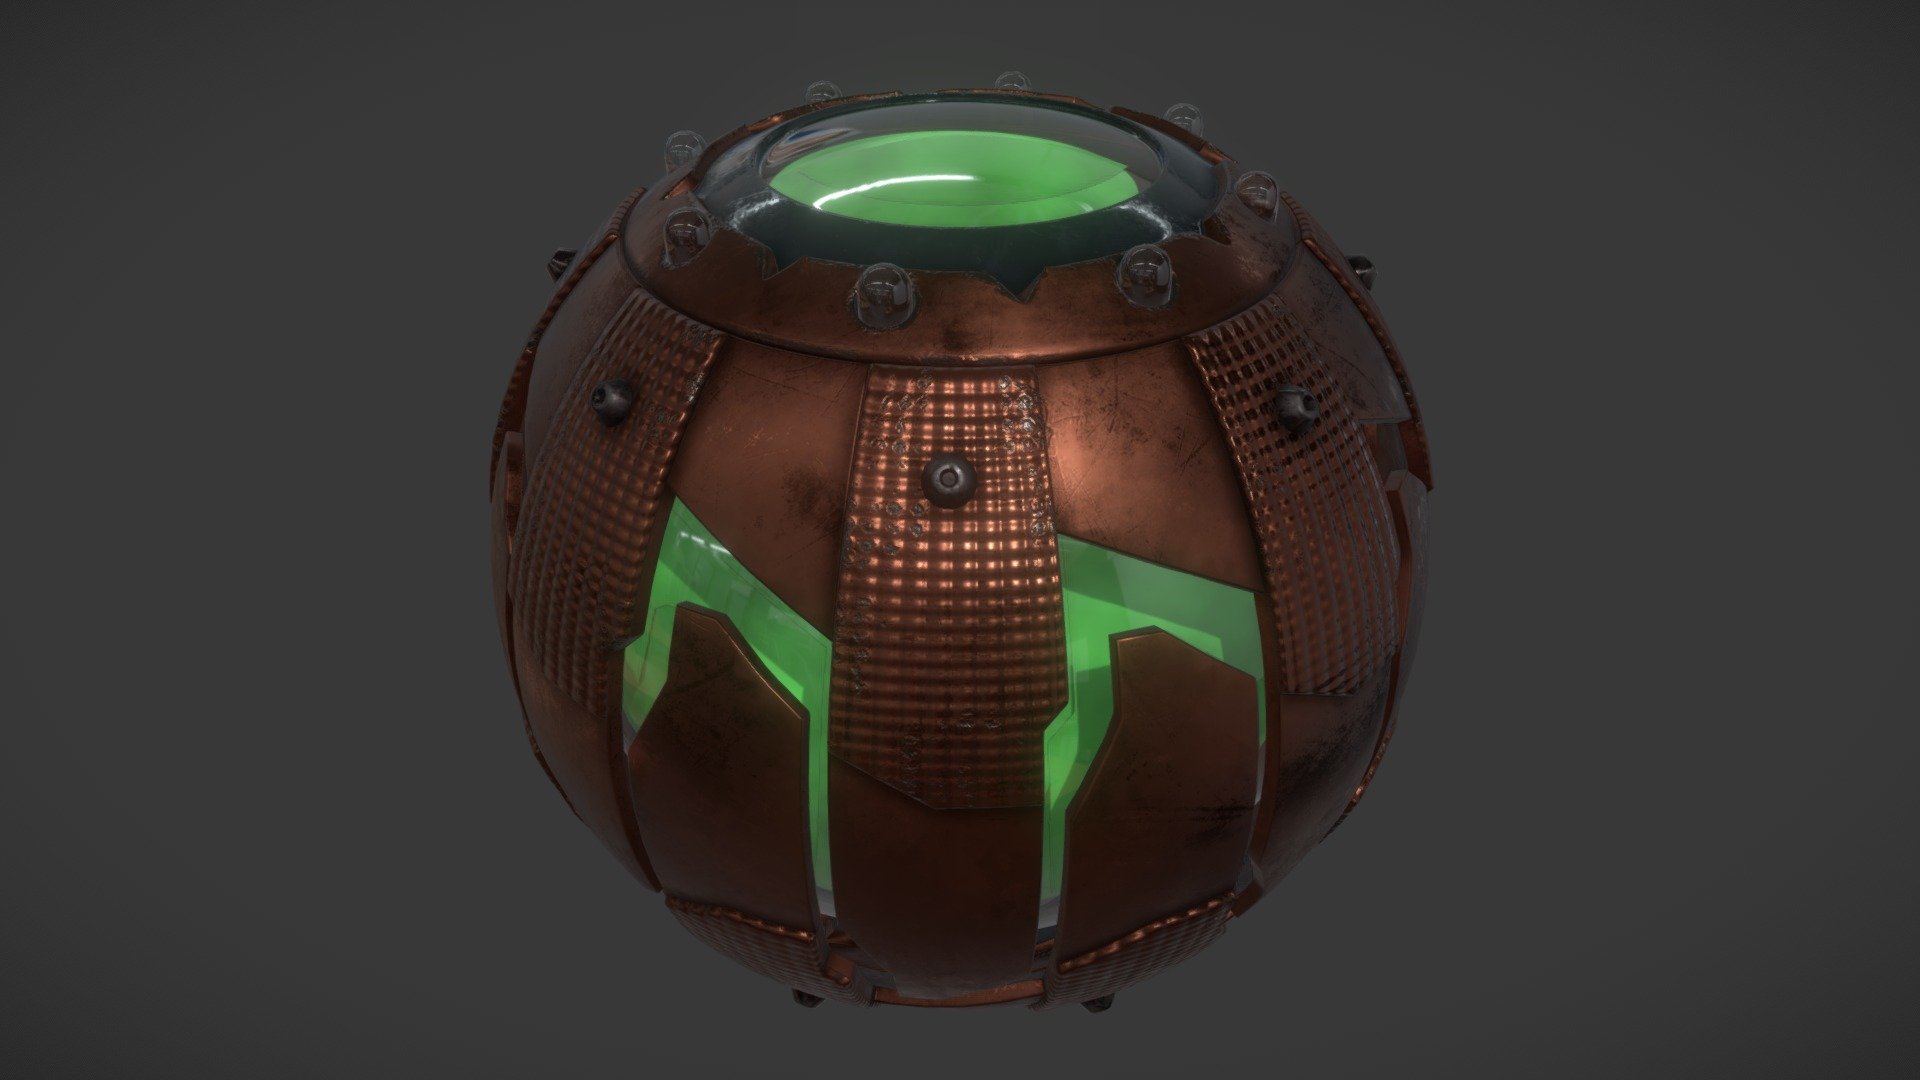 A 3D Model of The Green Goblin's Pumpkin Bombs - This is a replica from &ldquo;Spiderman 2 (2004) and Spiderman: No Way Home (2021)